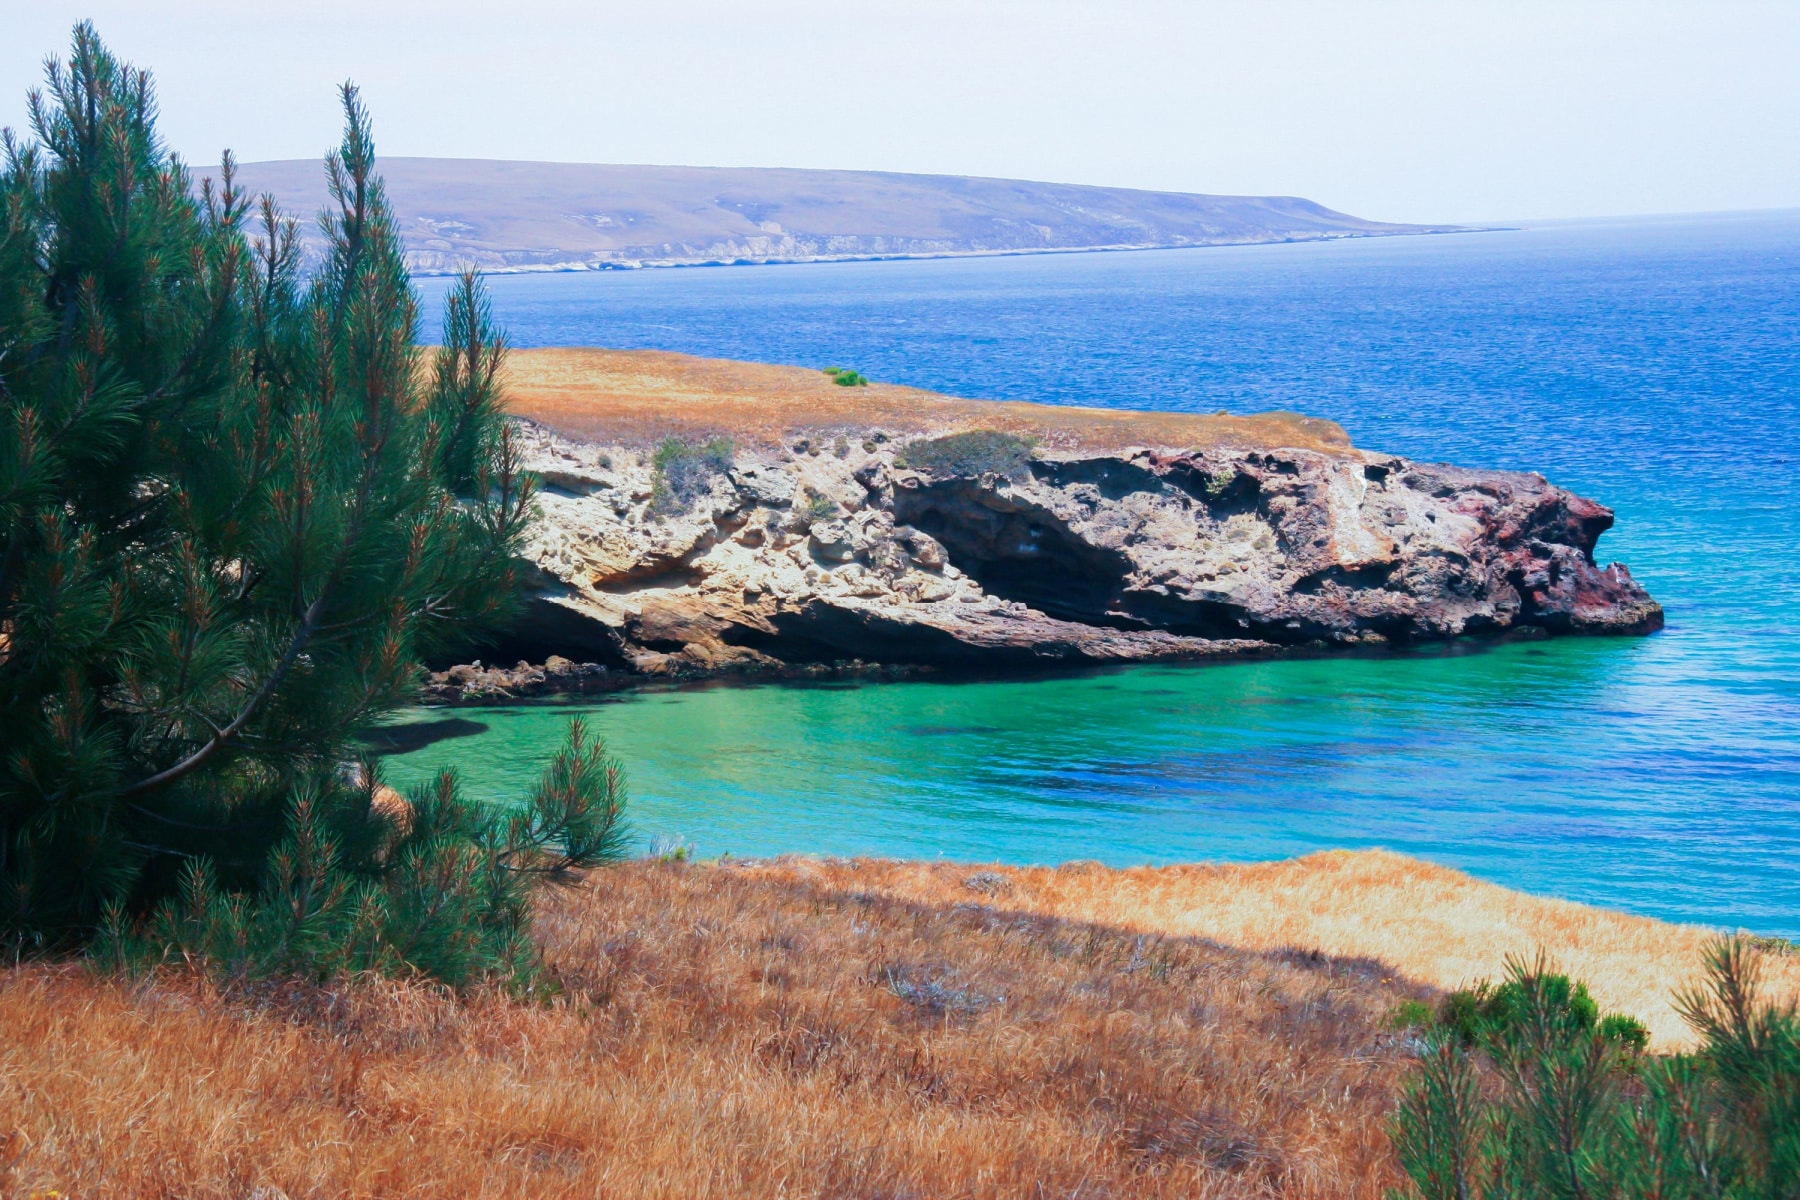 A Torrey Pine Tree above the coastline of Santa Rosa, with turquoise waters and cliffs beyond. 